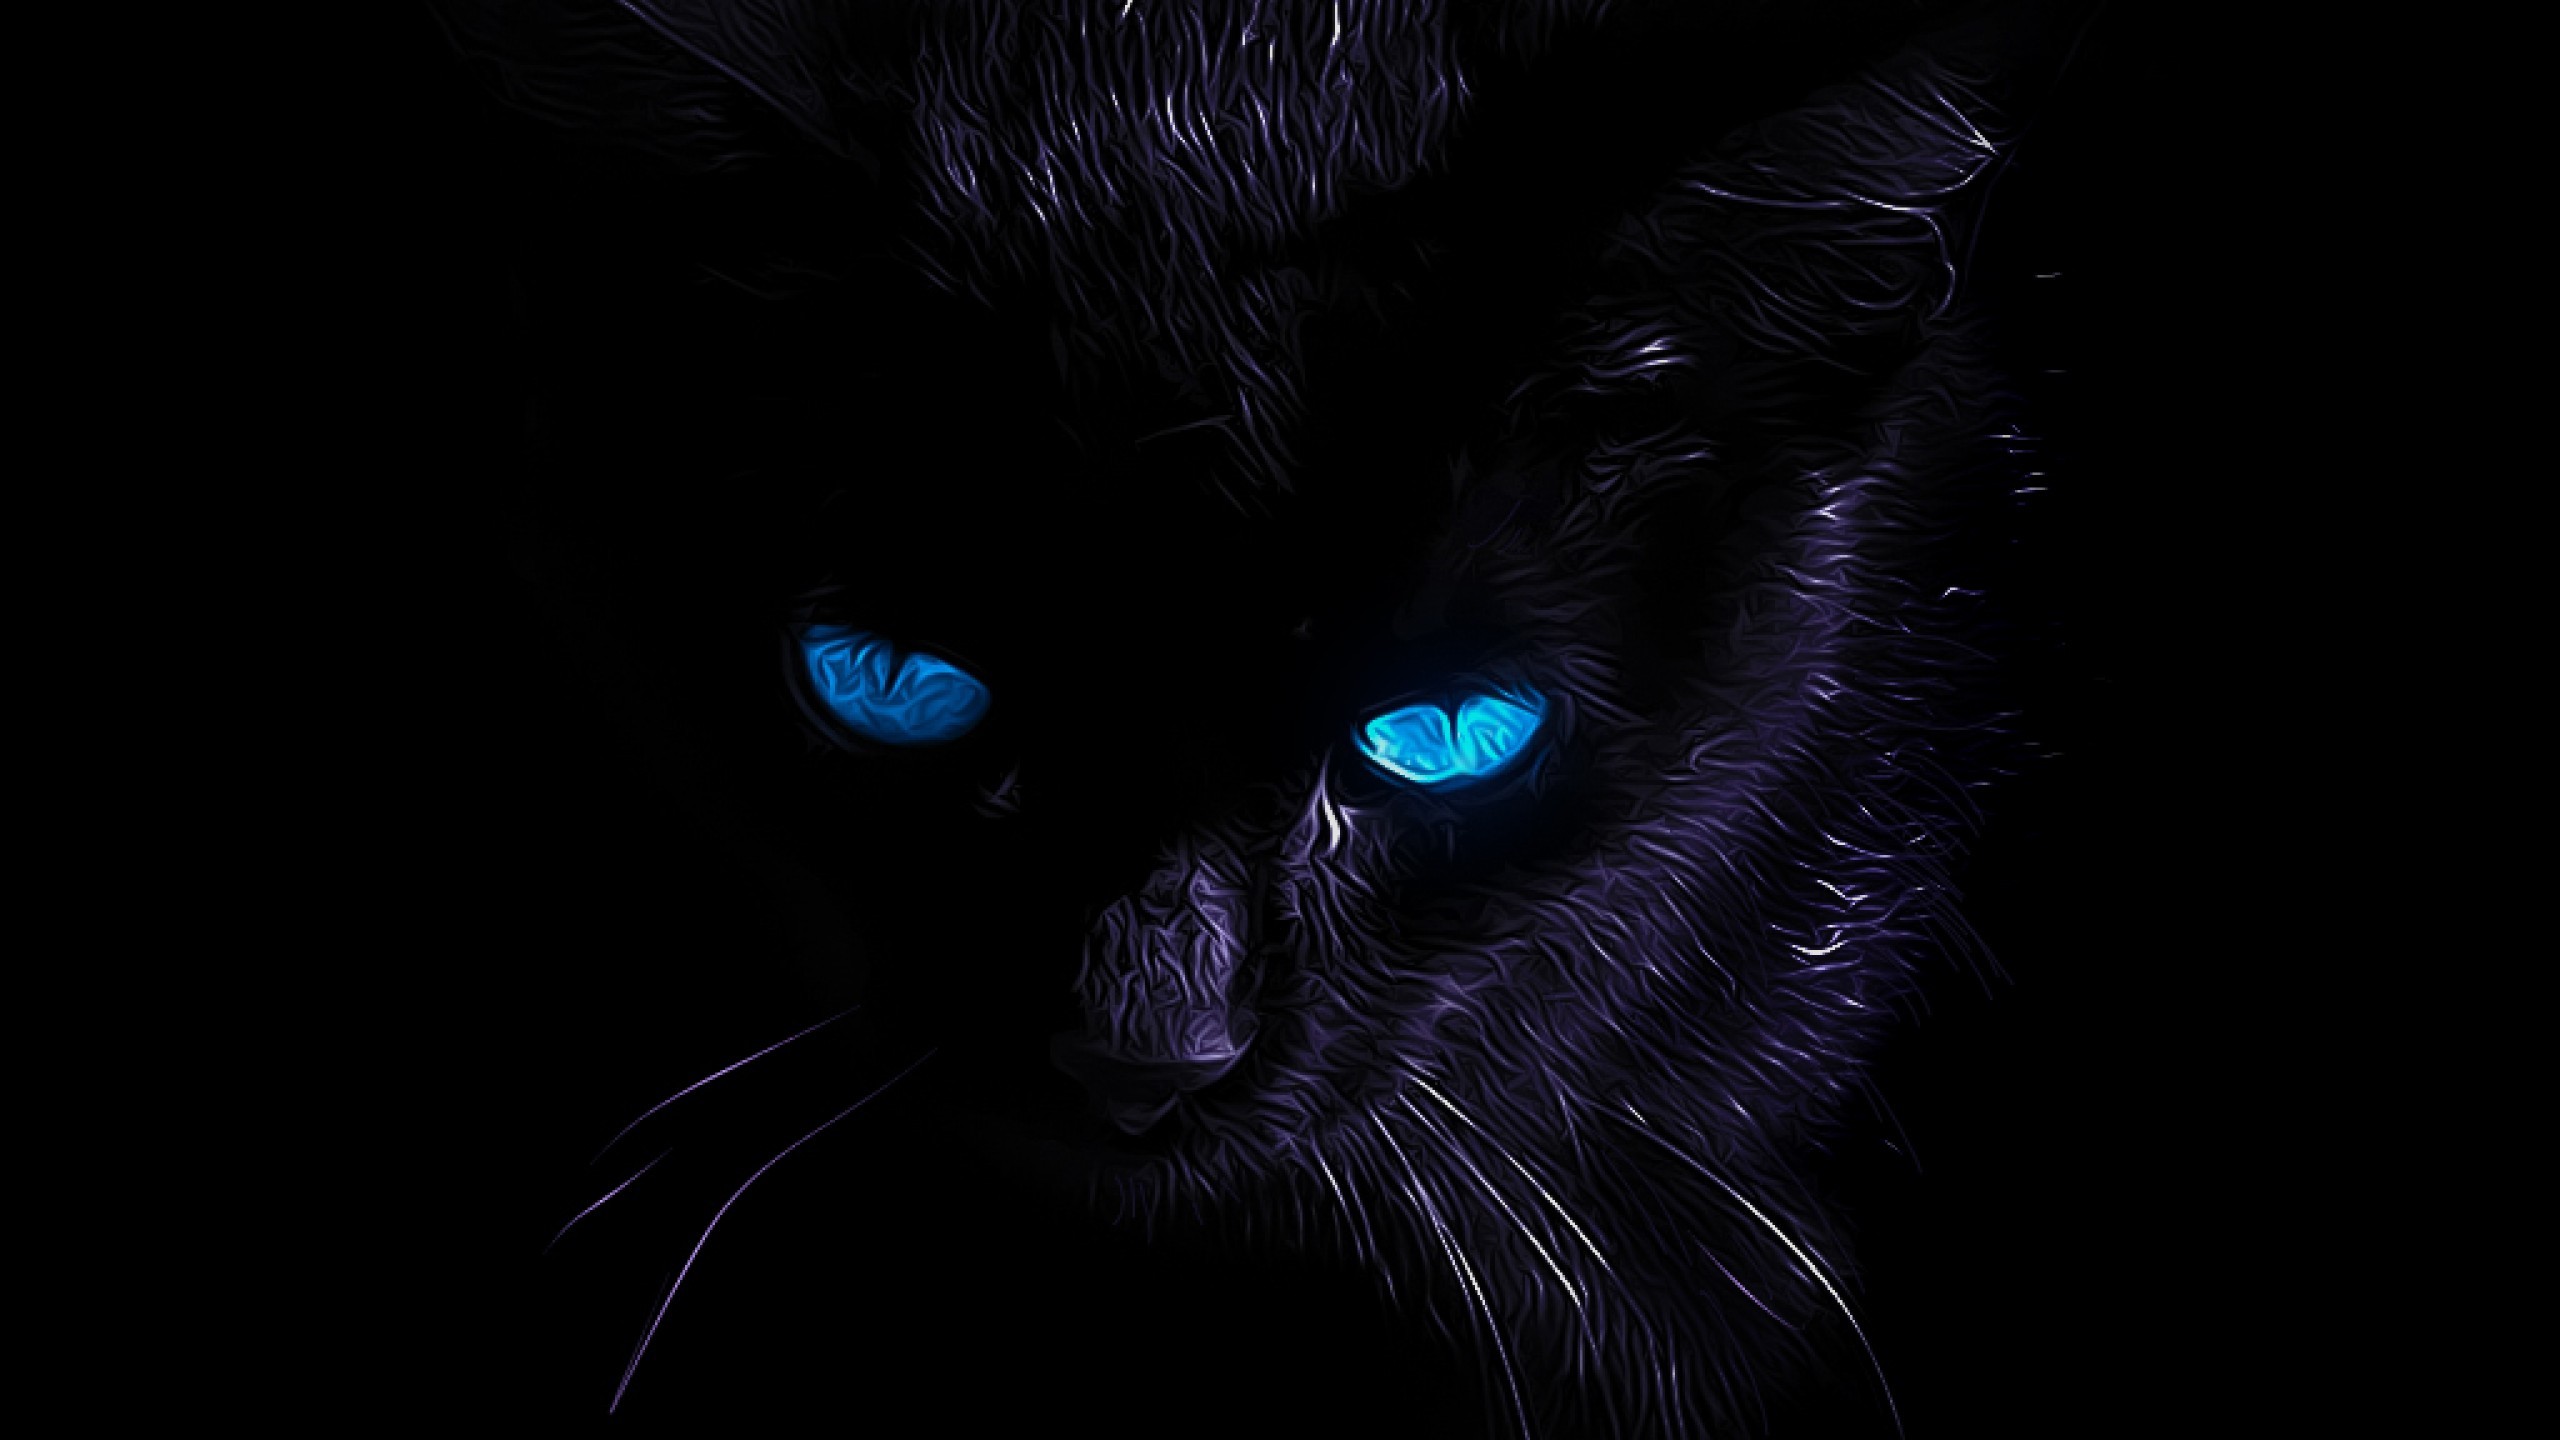 2560x1440 ... Funny black cat xD - Fantasy & Abstract Background Wallpapers on .